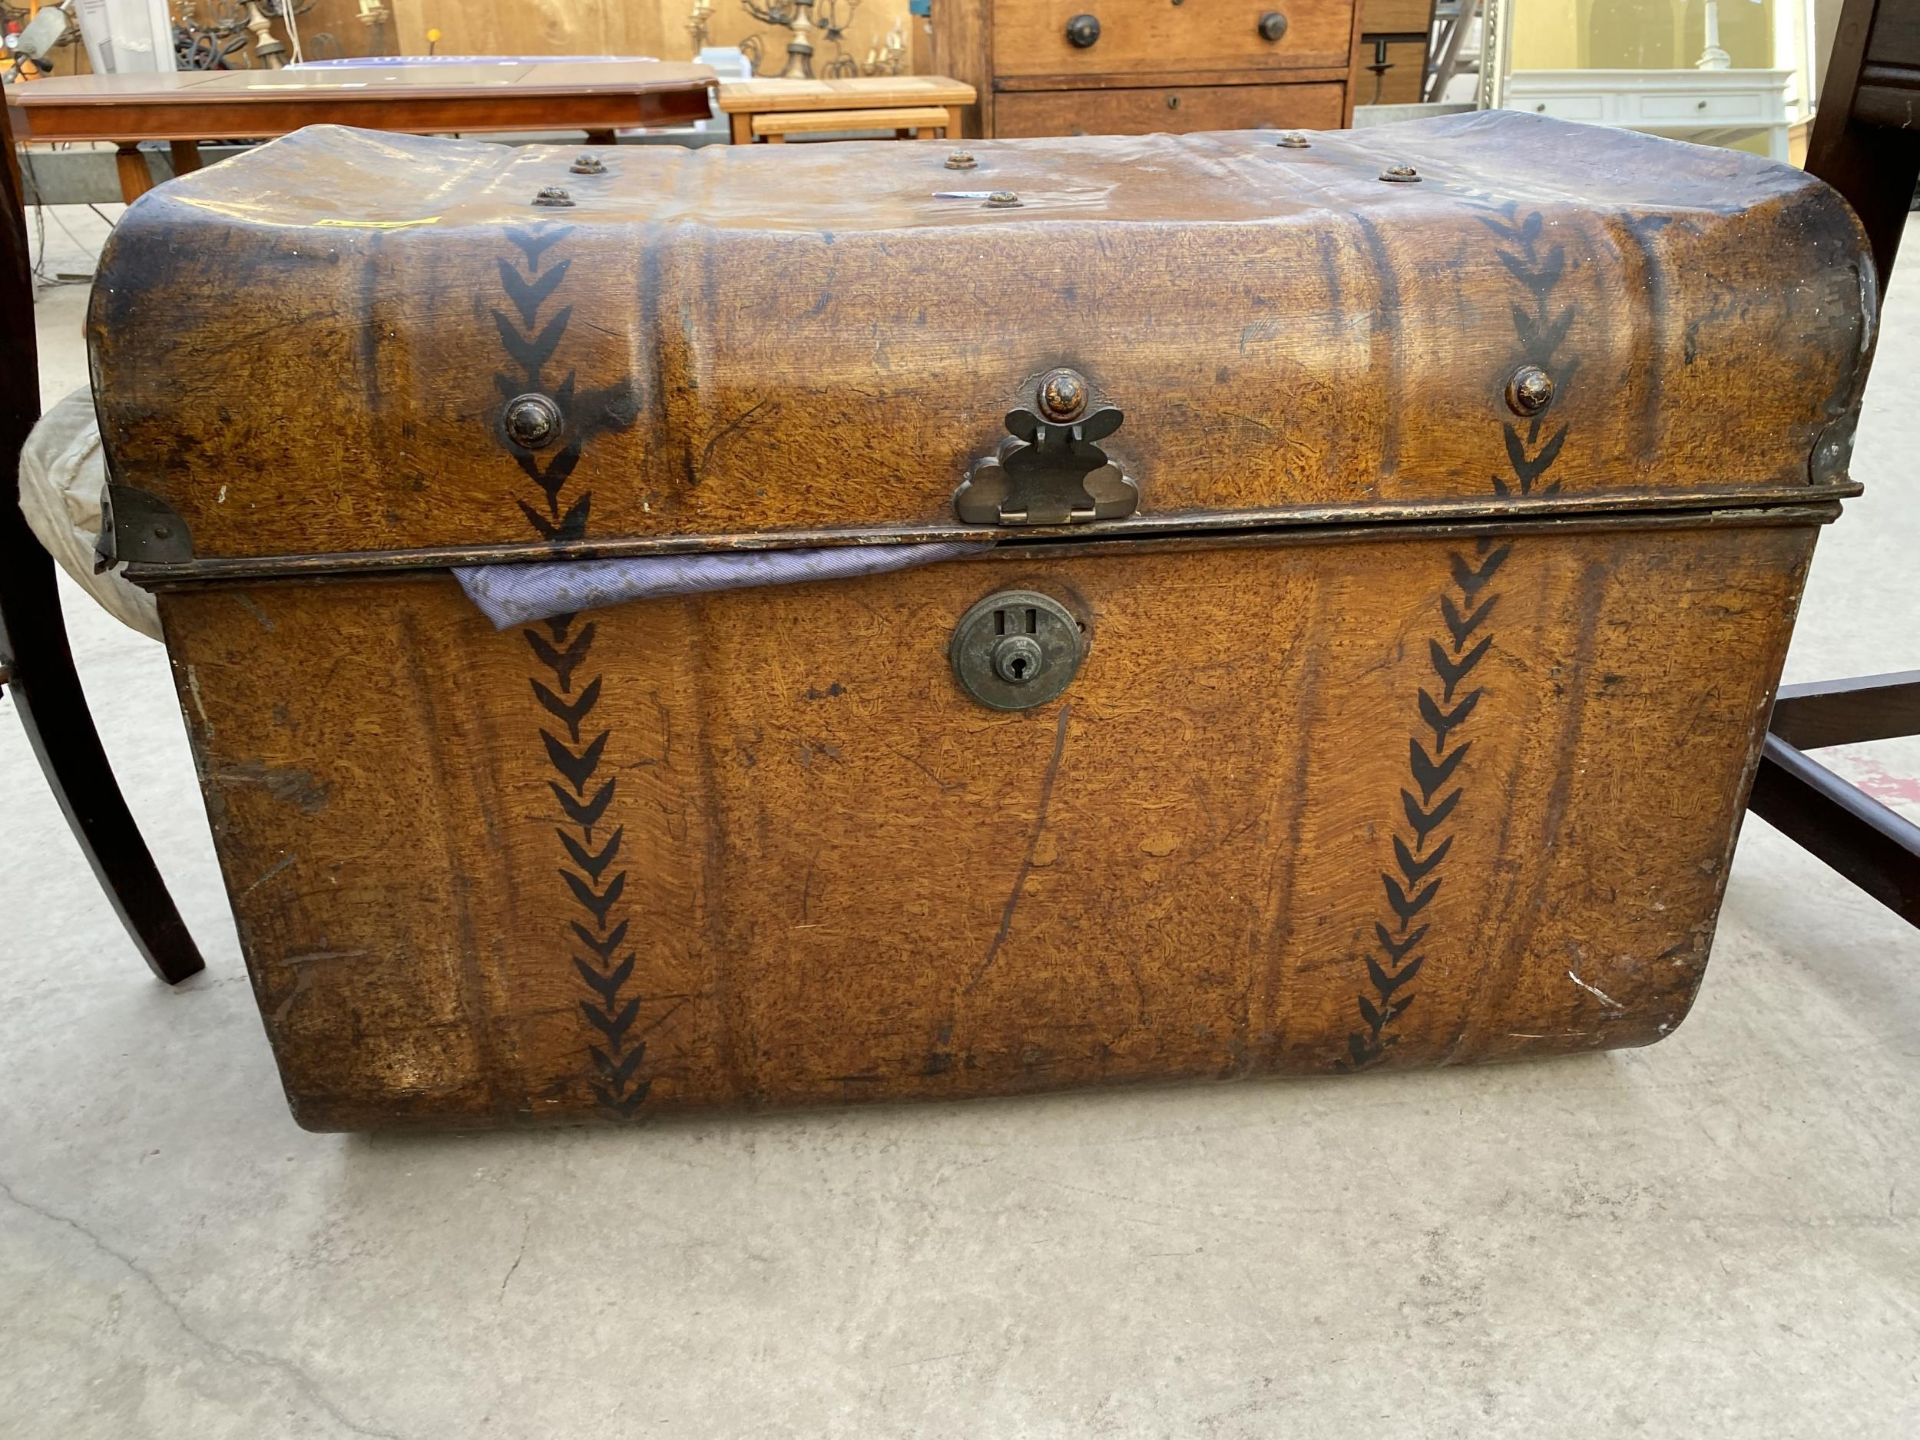 A PAINTED METALWARE TRAVELING TRUNK - Image 2 of 3